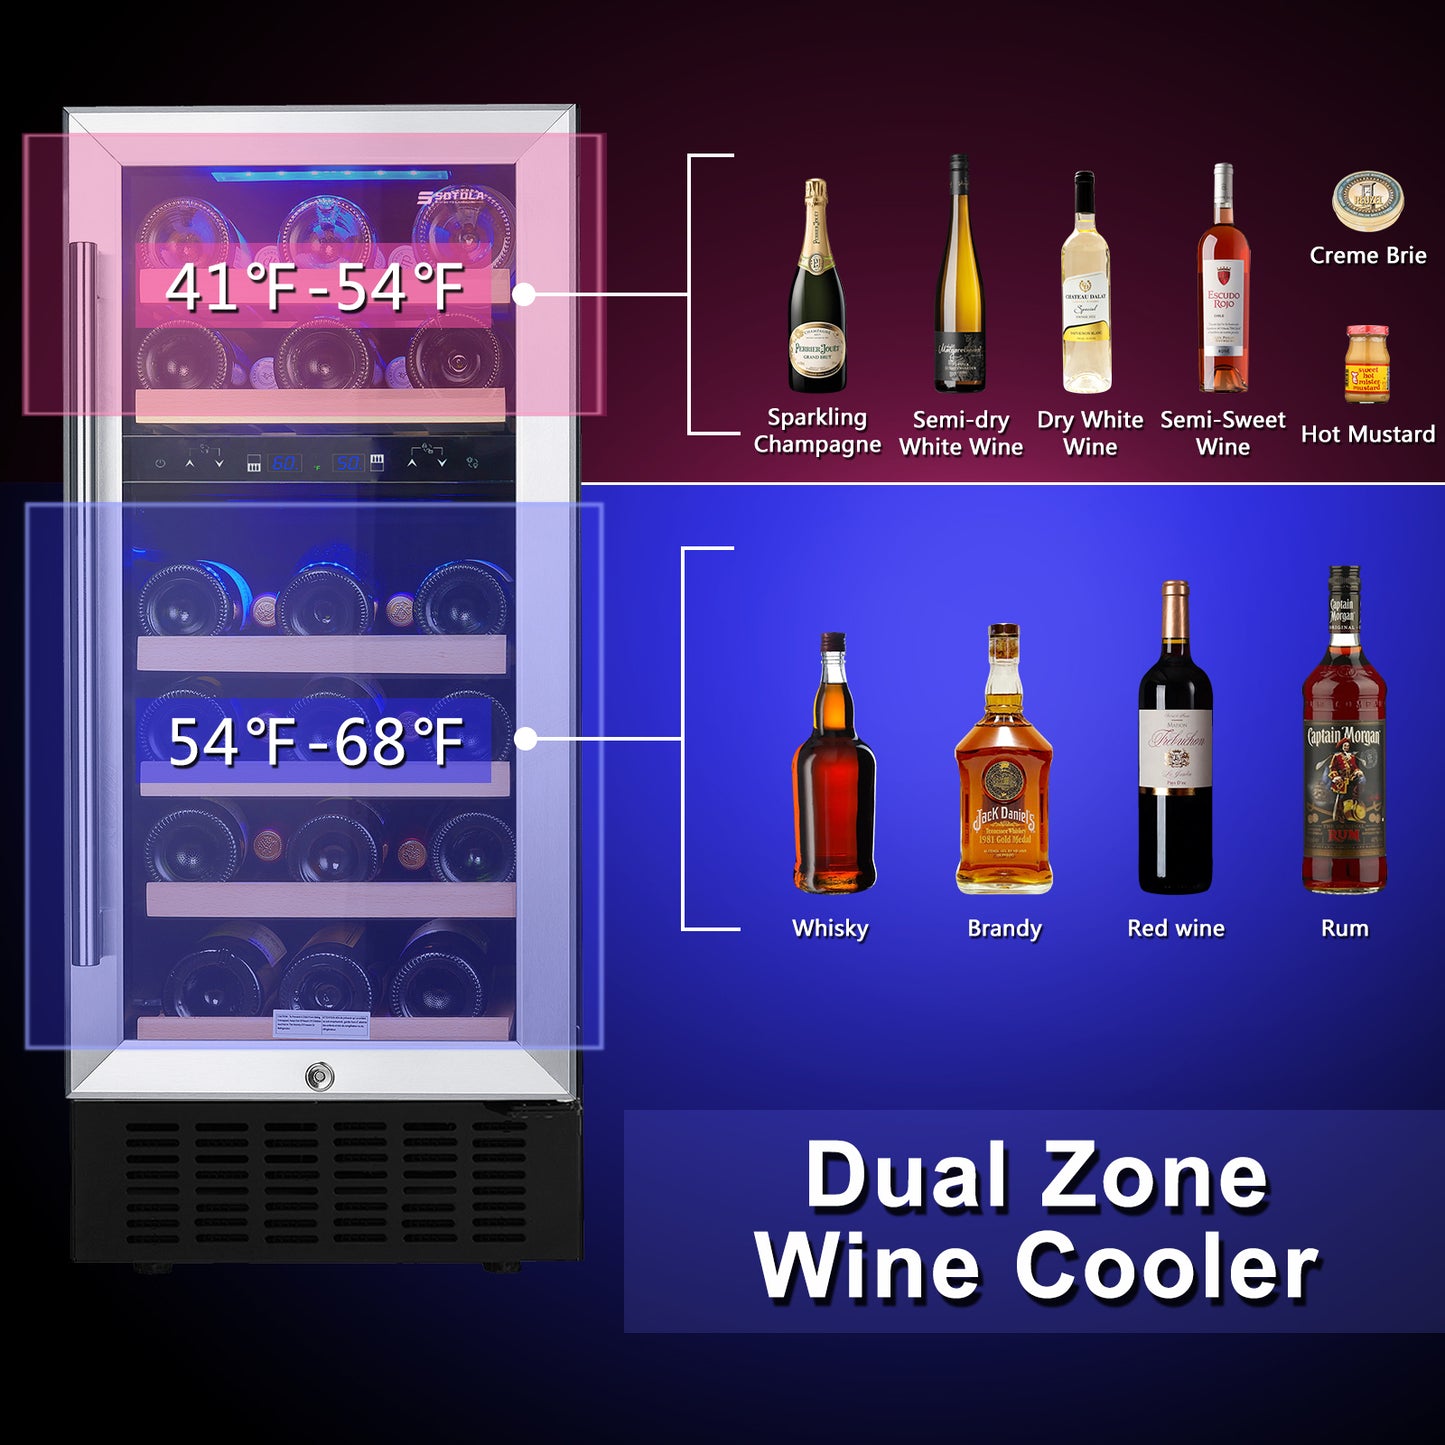 SOTOLA 15-Inch Dual Zone Wine Cooler Refrigerator with 28 Bottle Capacity